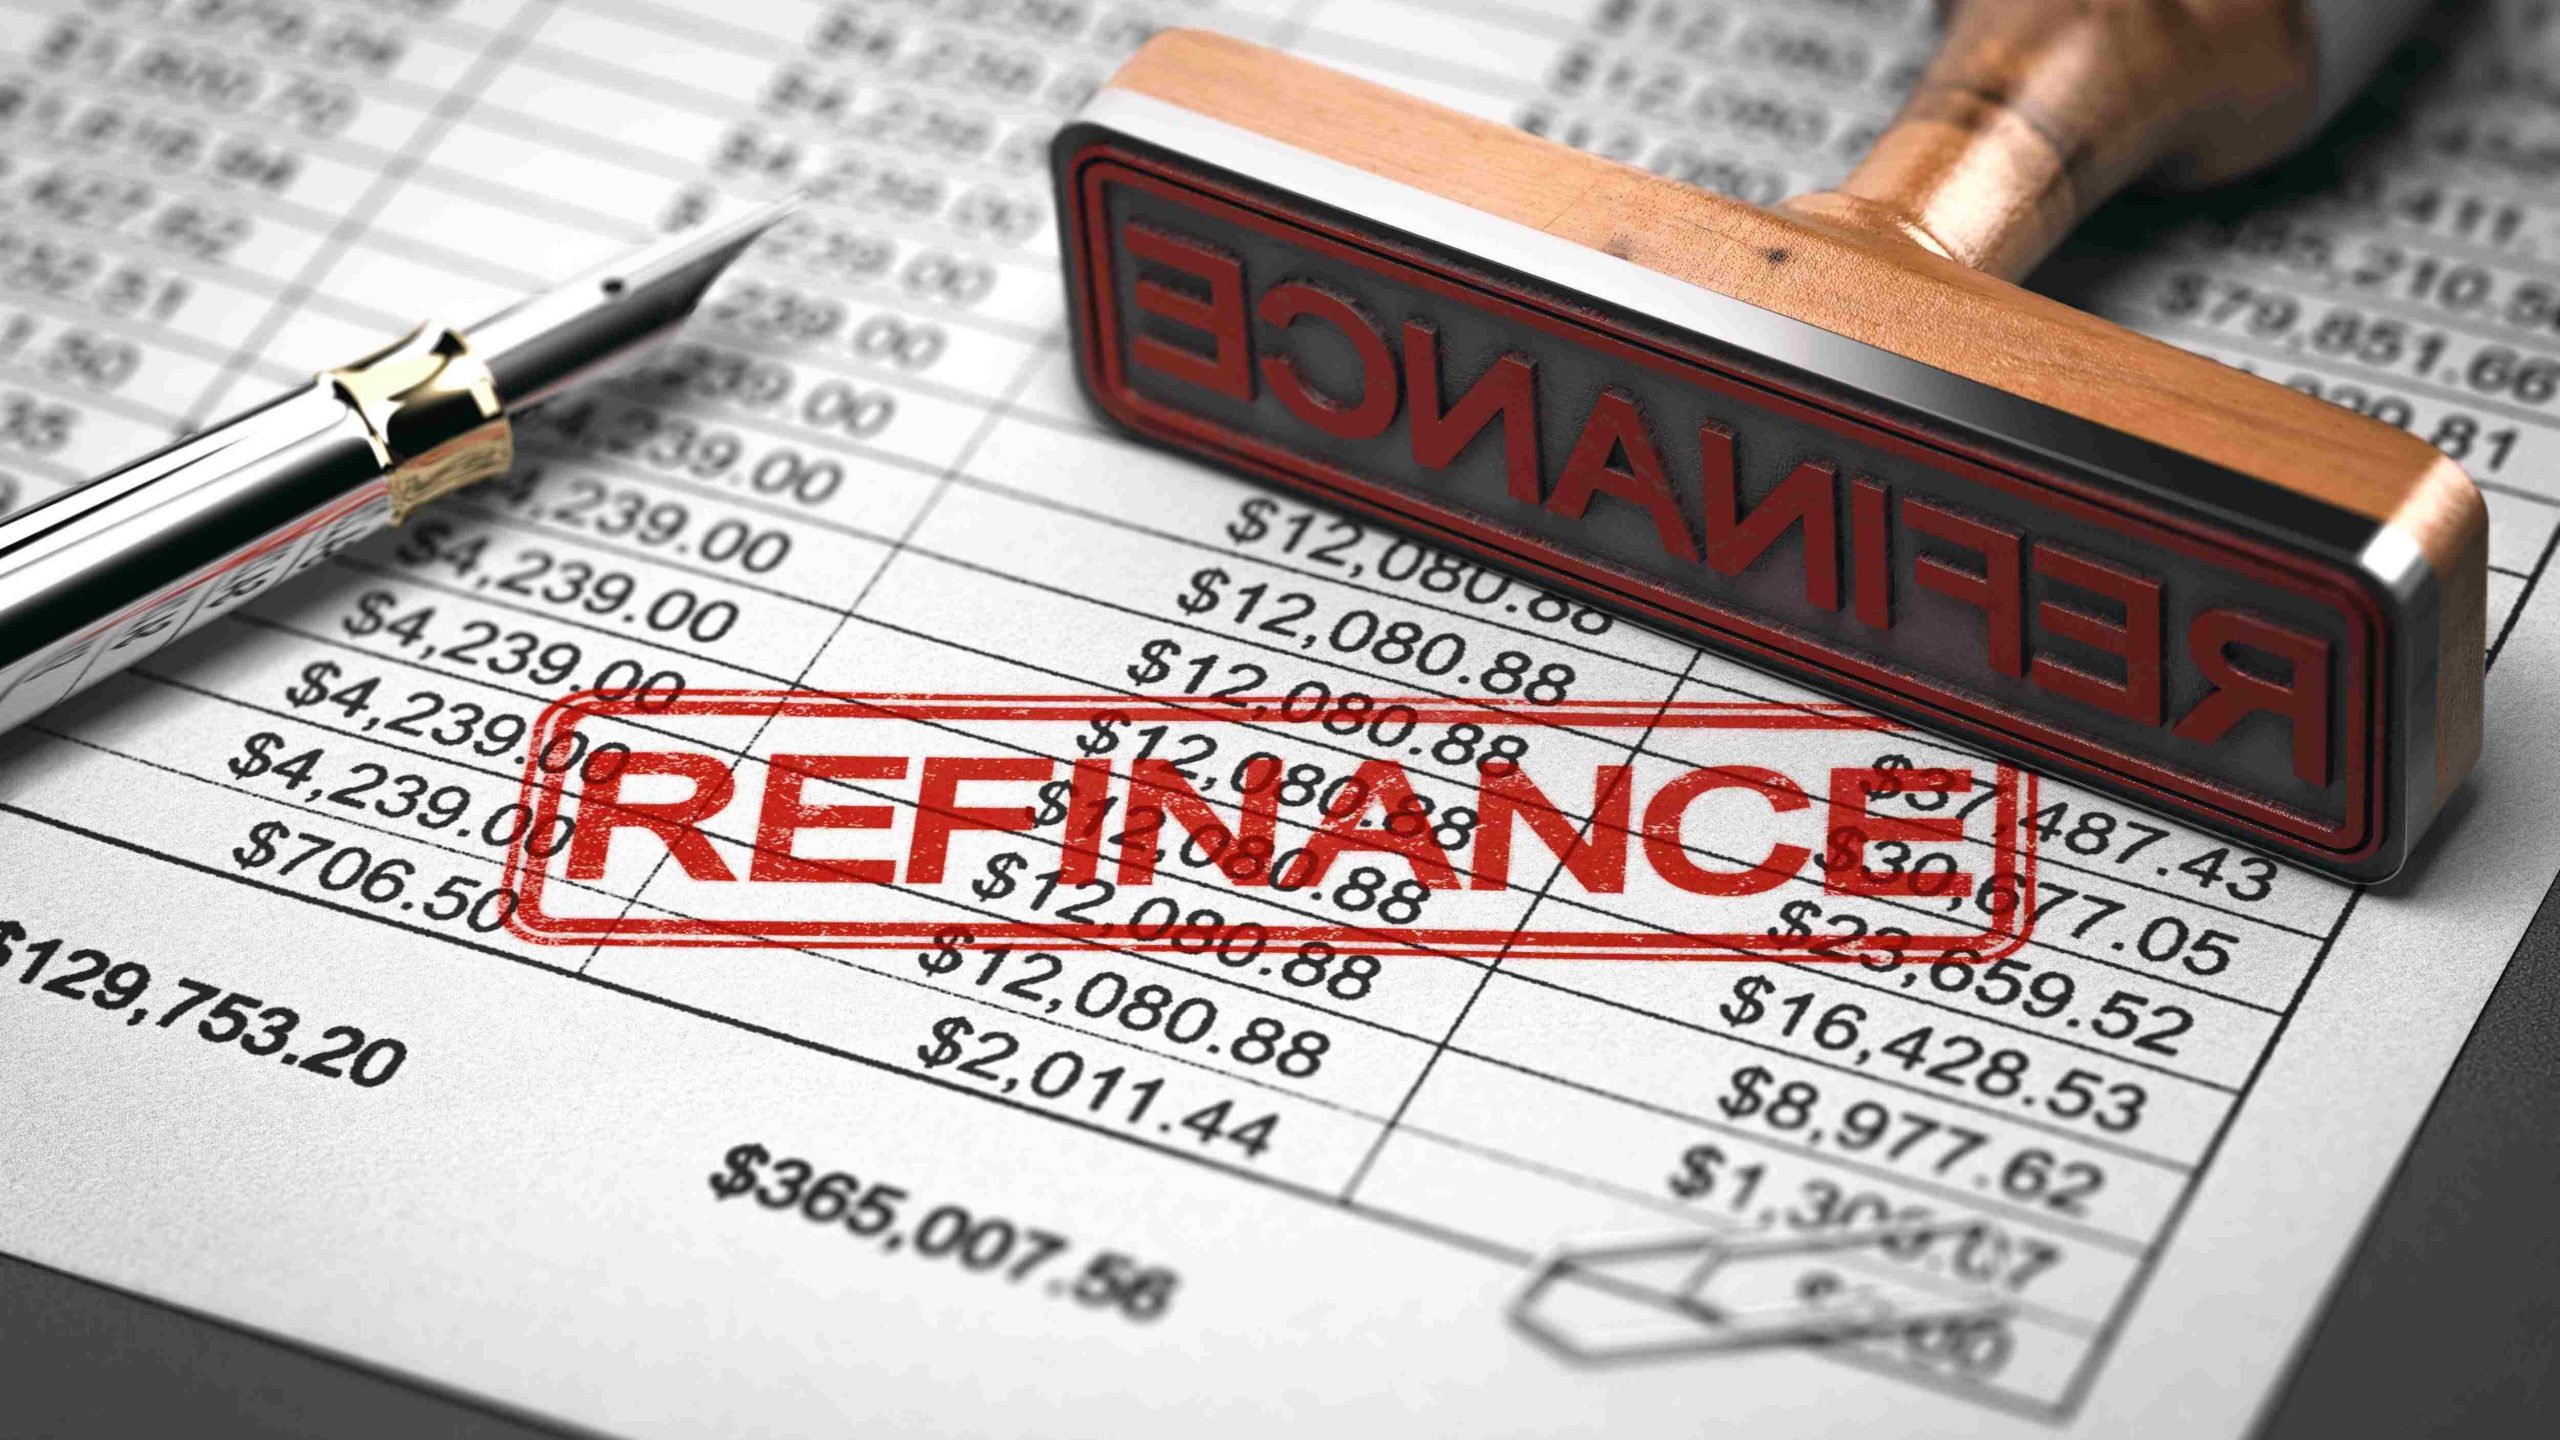 payment schedule with a refinance stamp on it